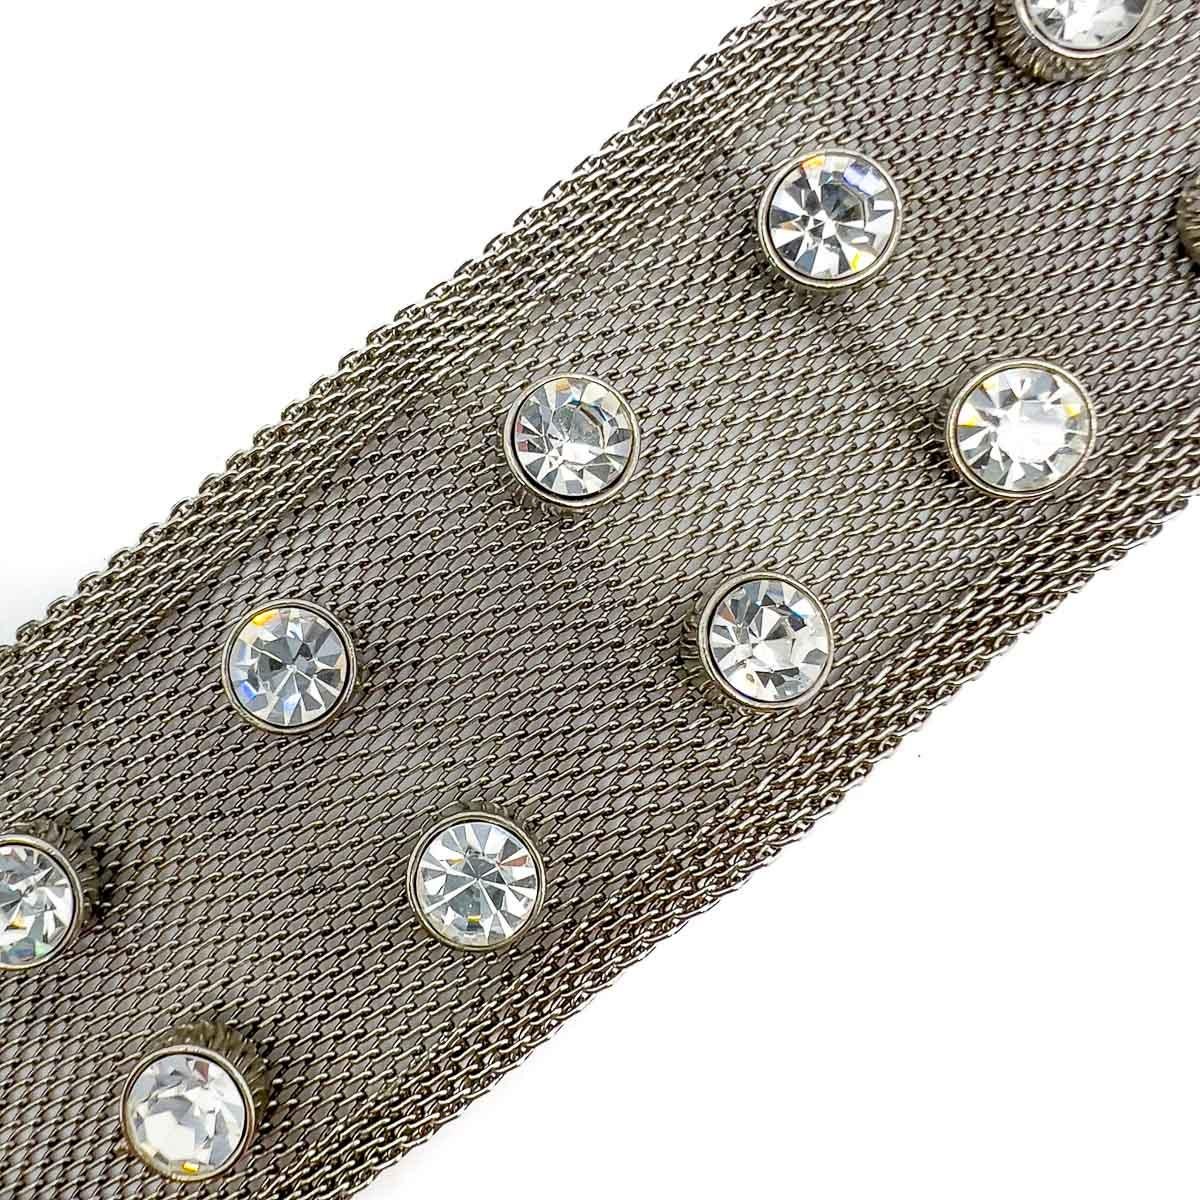 A stunning party piece with this Vintage Solitaire Strap Bracelet. Huge crystals set in mesh provide the ultimate glam yet edgy vibe.

An unsigned beauty. A rare treasure. Just because a jewel doesn’t carry a designer name, doesn’t mean it isn't